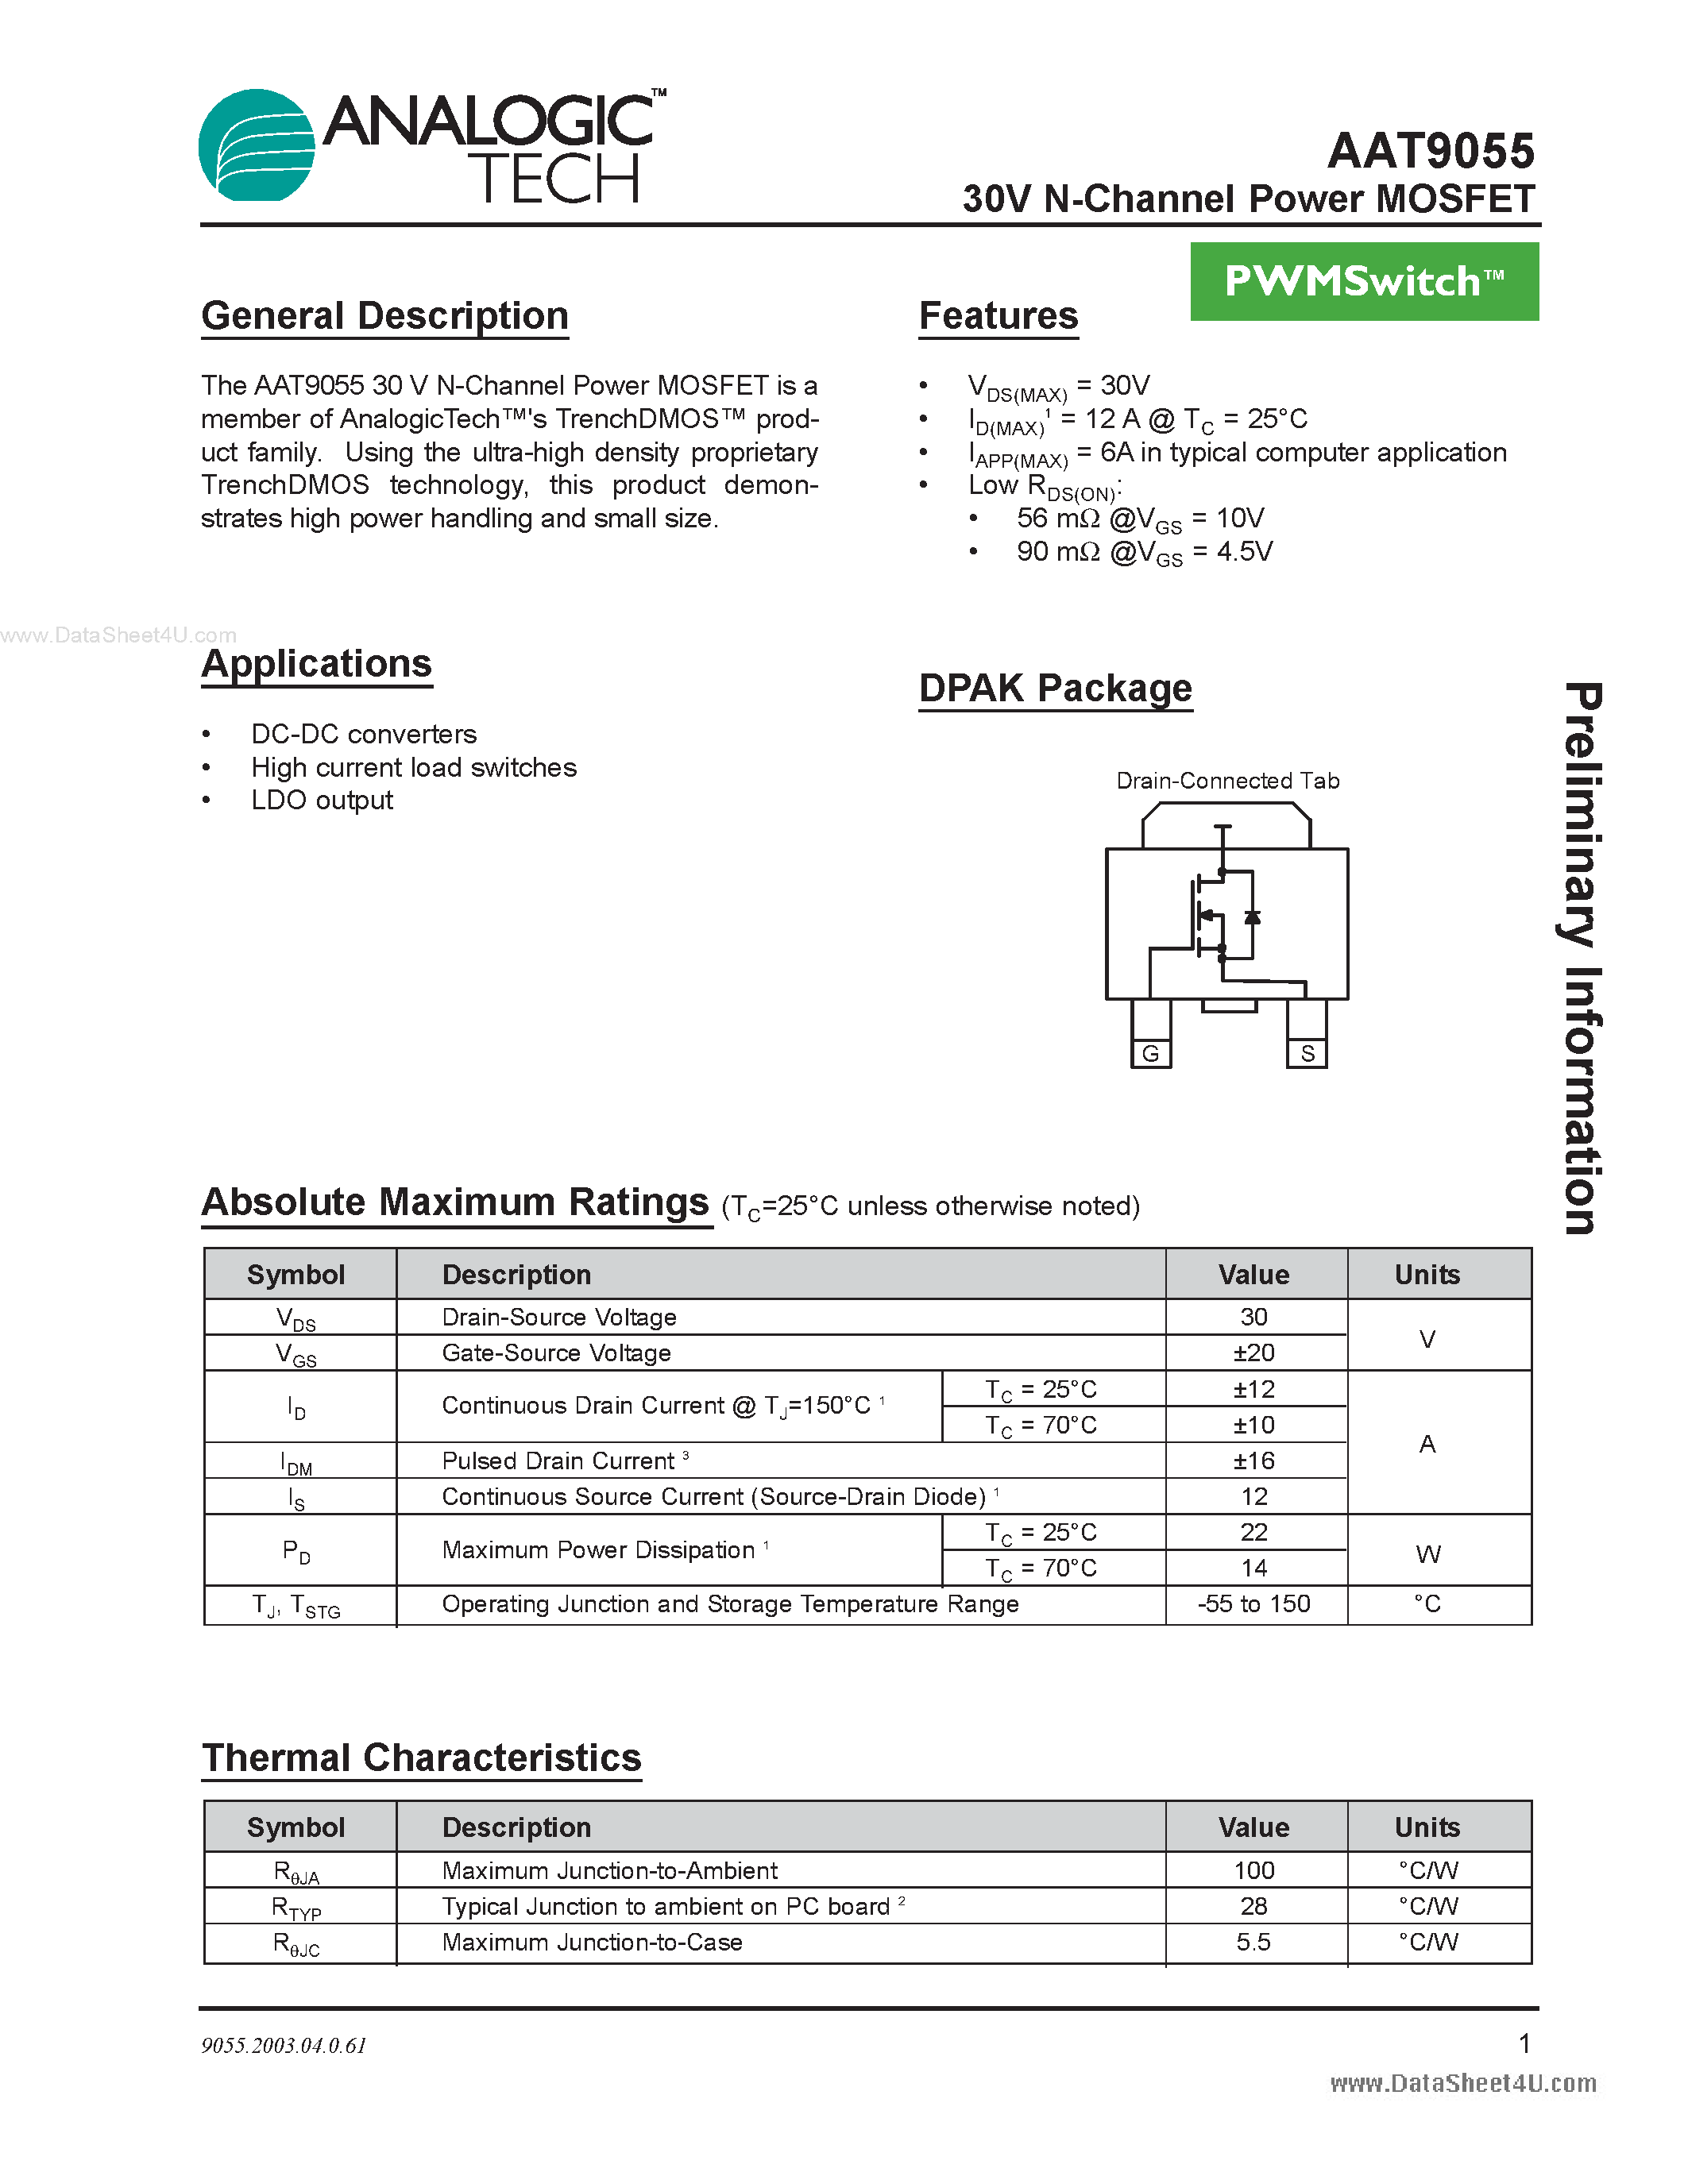 Datasheet AAT9055 - 30V N-Channel Power MOSFET page 1